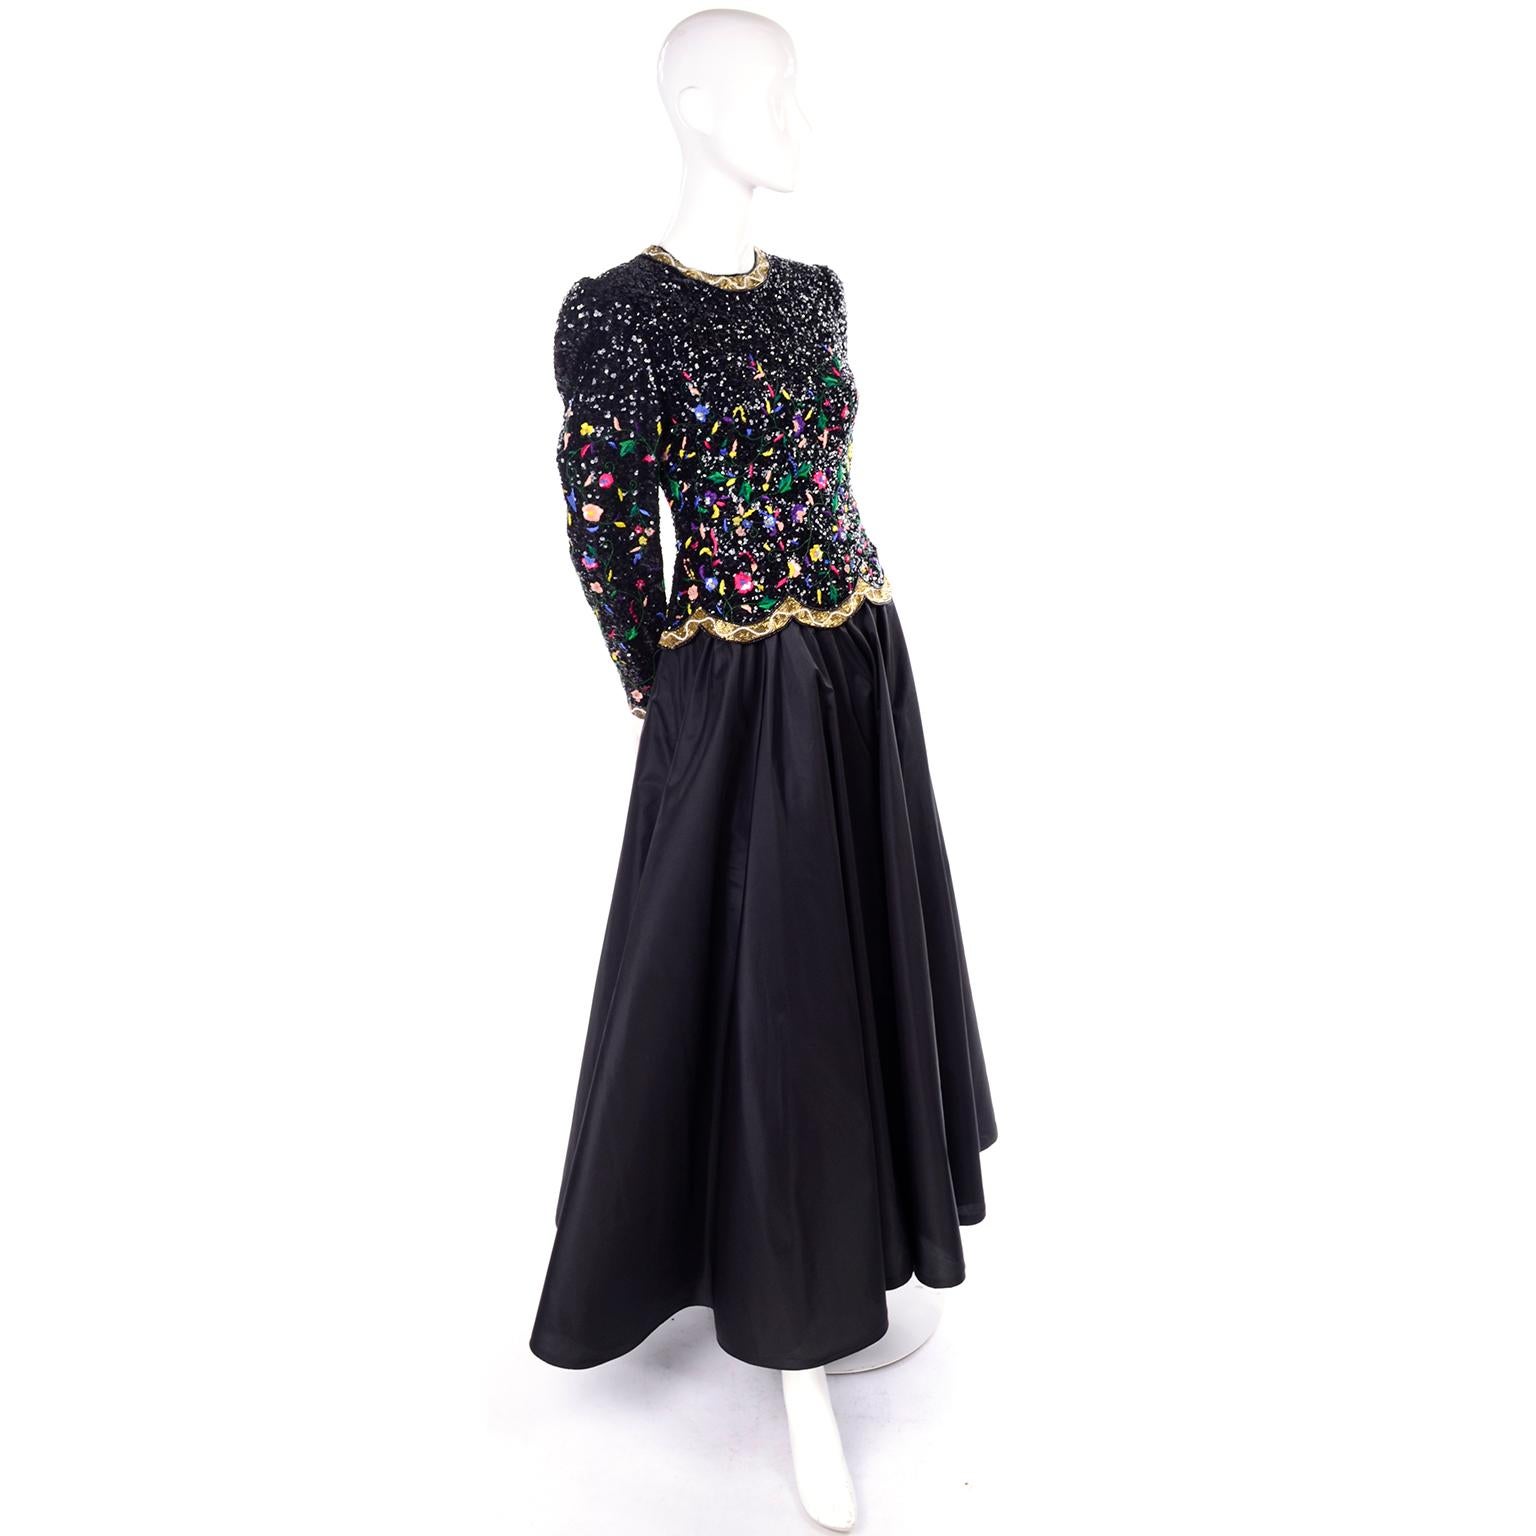 1980's Richilene New York black evening gown with a colorful embroidered, beaded & sequin bodice! The drop waist bodice has an overlayment that is covered with tiny black sequins and has a gold and white beaded trim. The sequin work has been